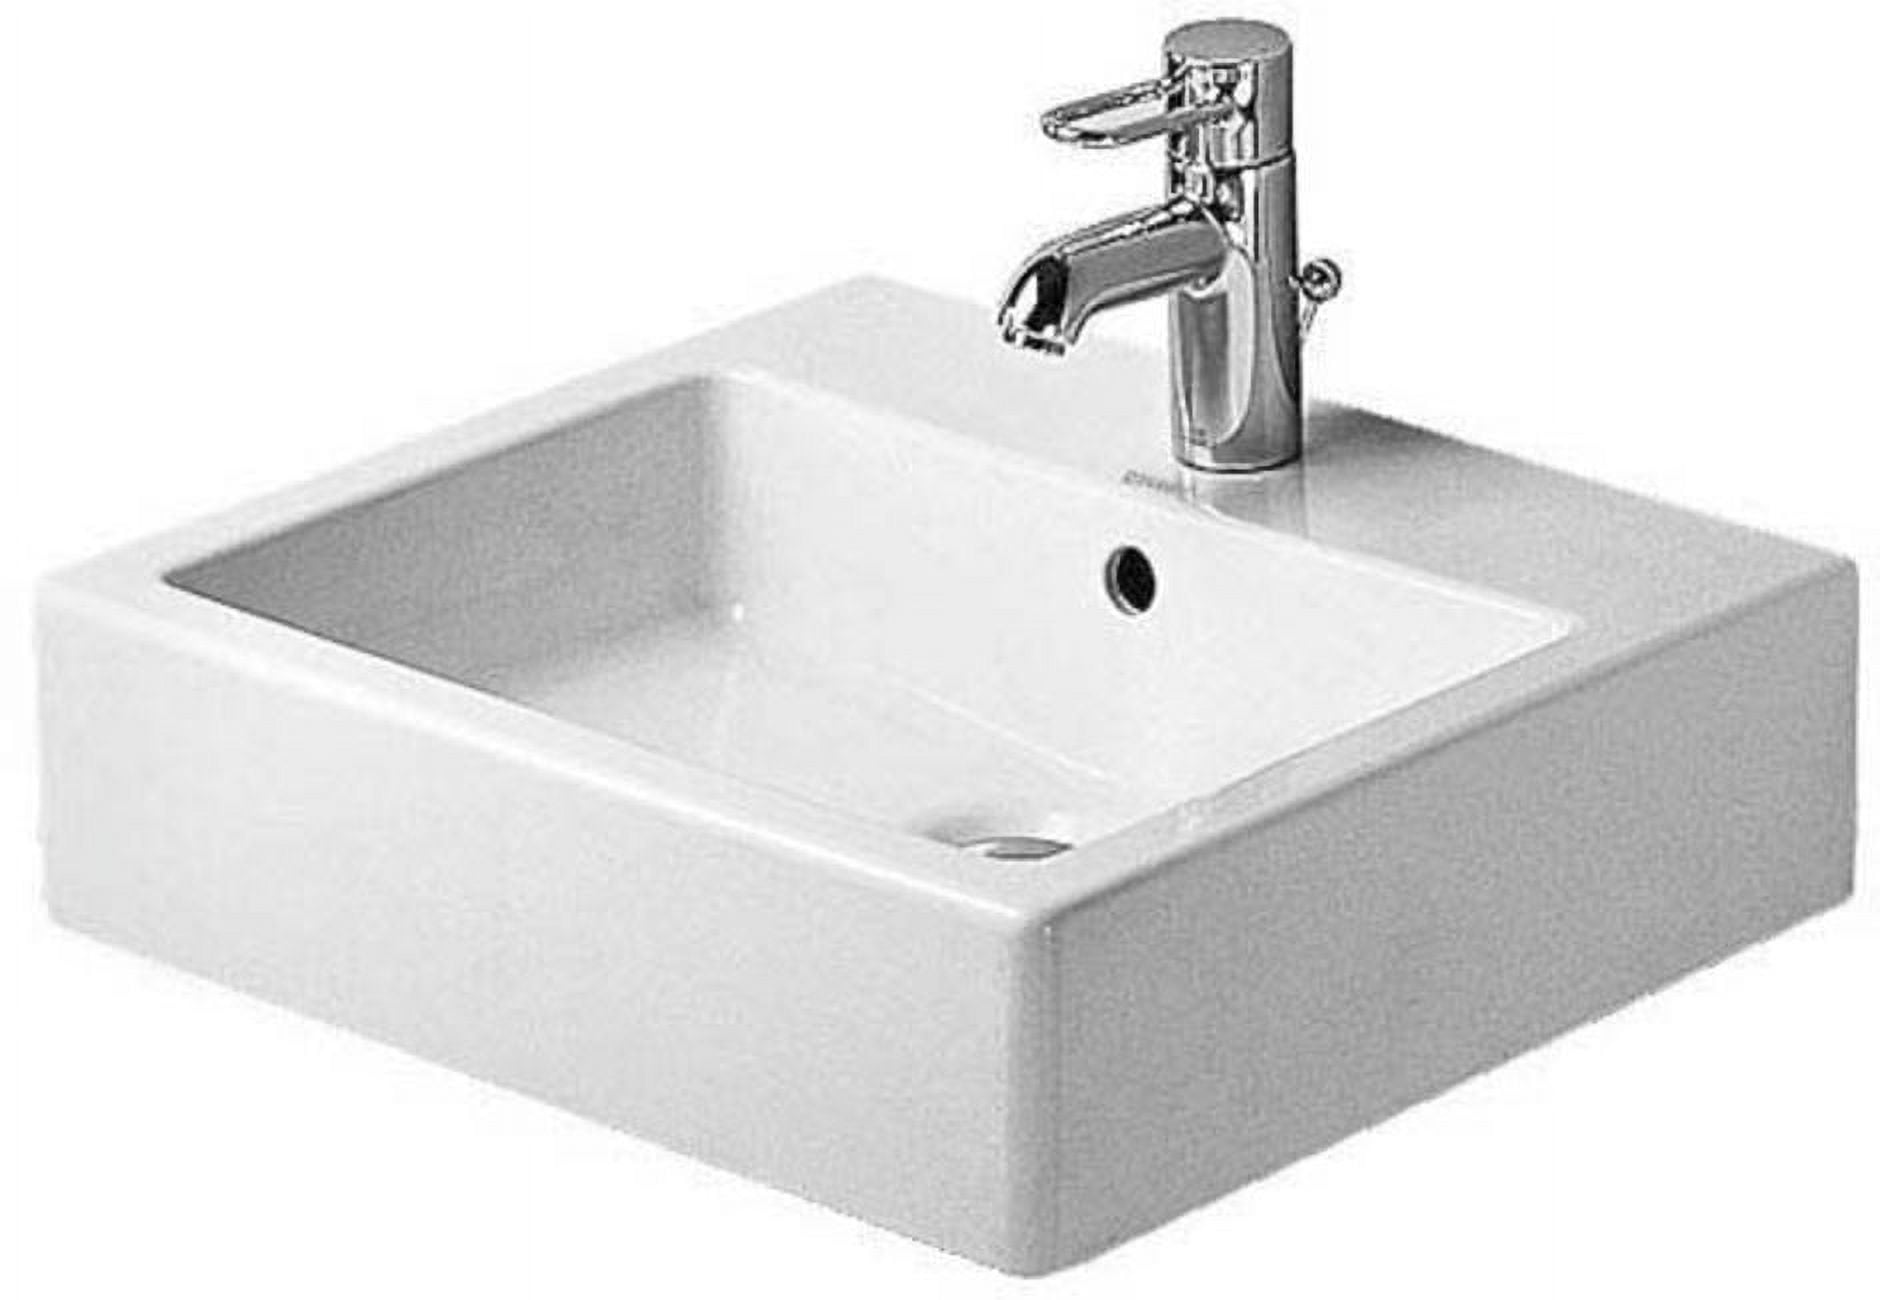 454500000 Vero Wall Mount Bathroom Sink With Overflow And 1 Tap Platform